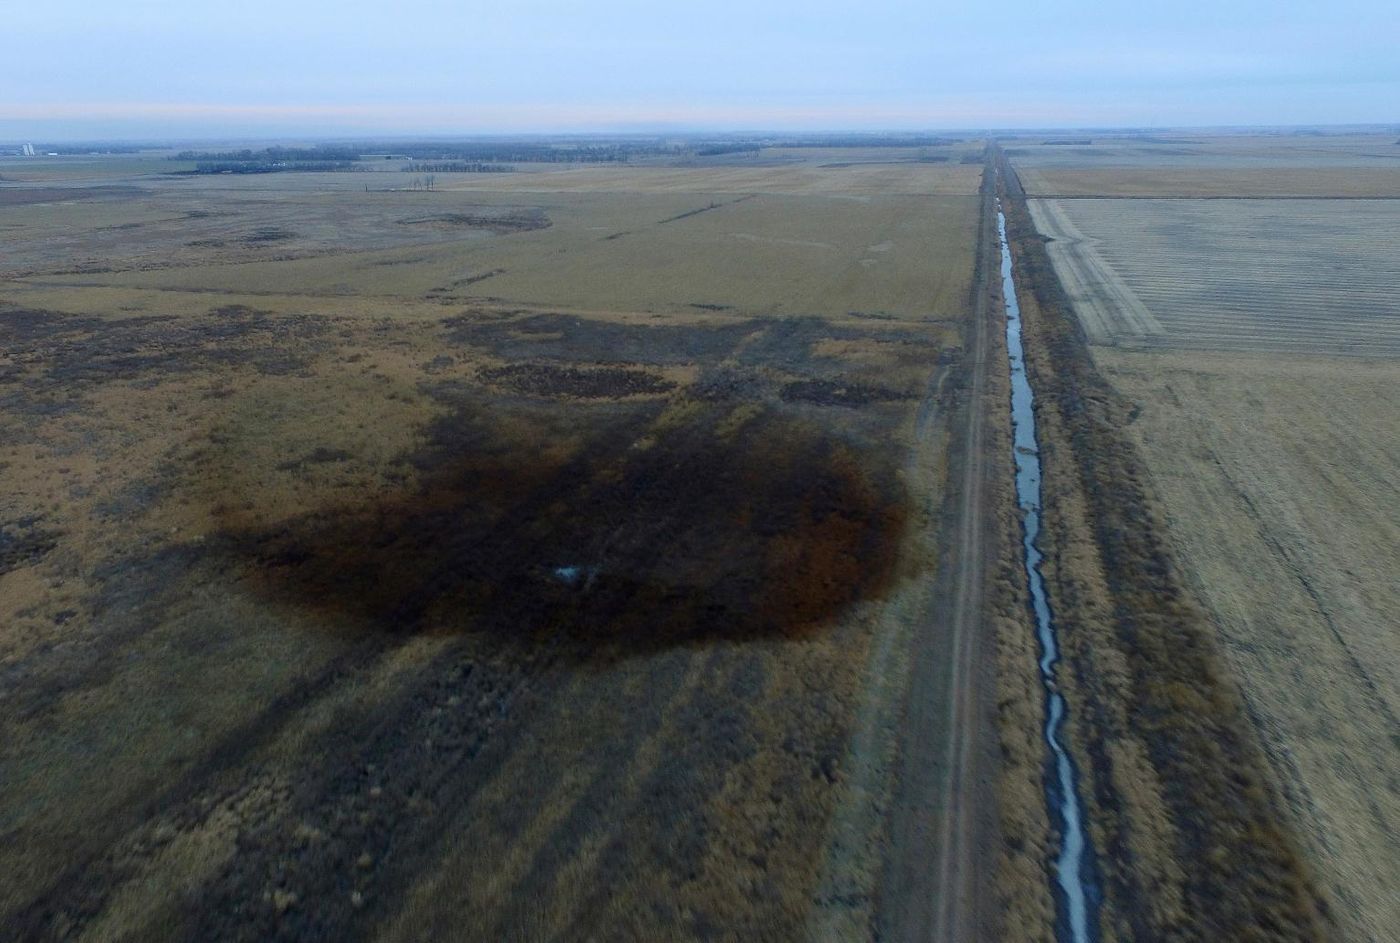 The pipeline covers over 2,000 miles. Photo: US News & World Report